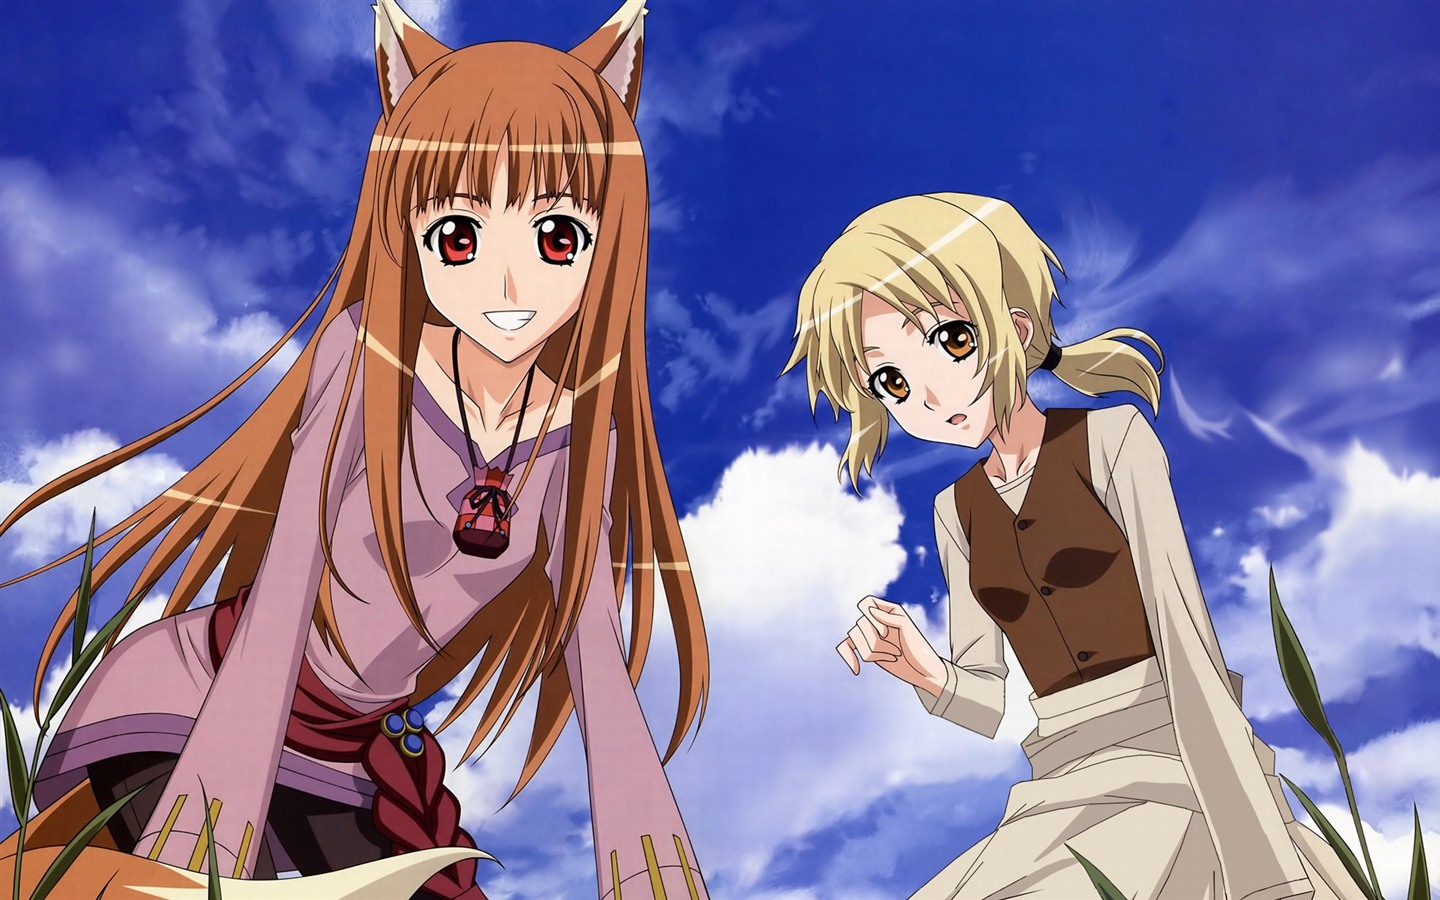 Spice and Wolf HD wallpapers #17 - 1440x900